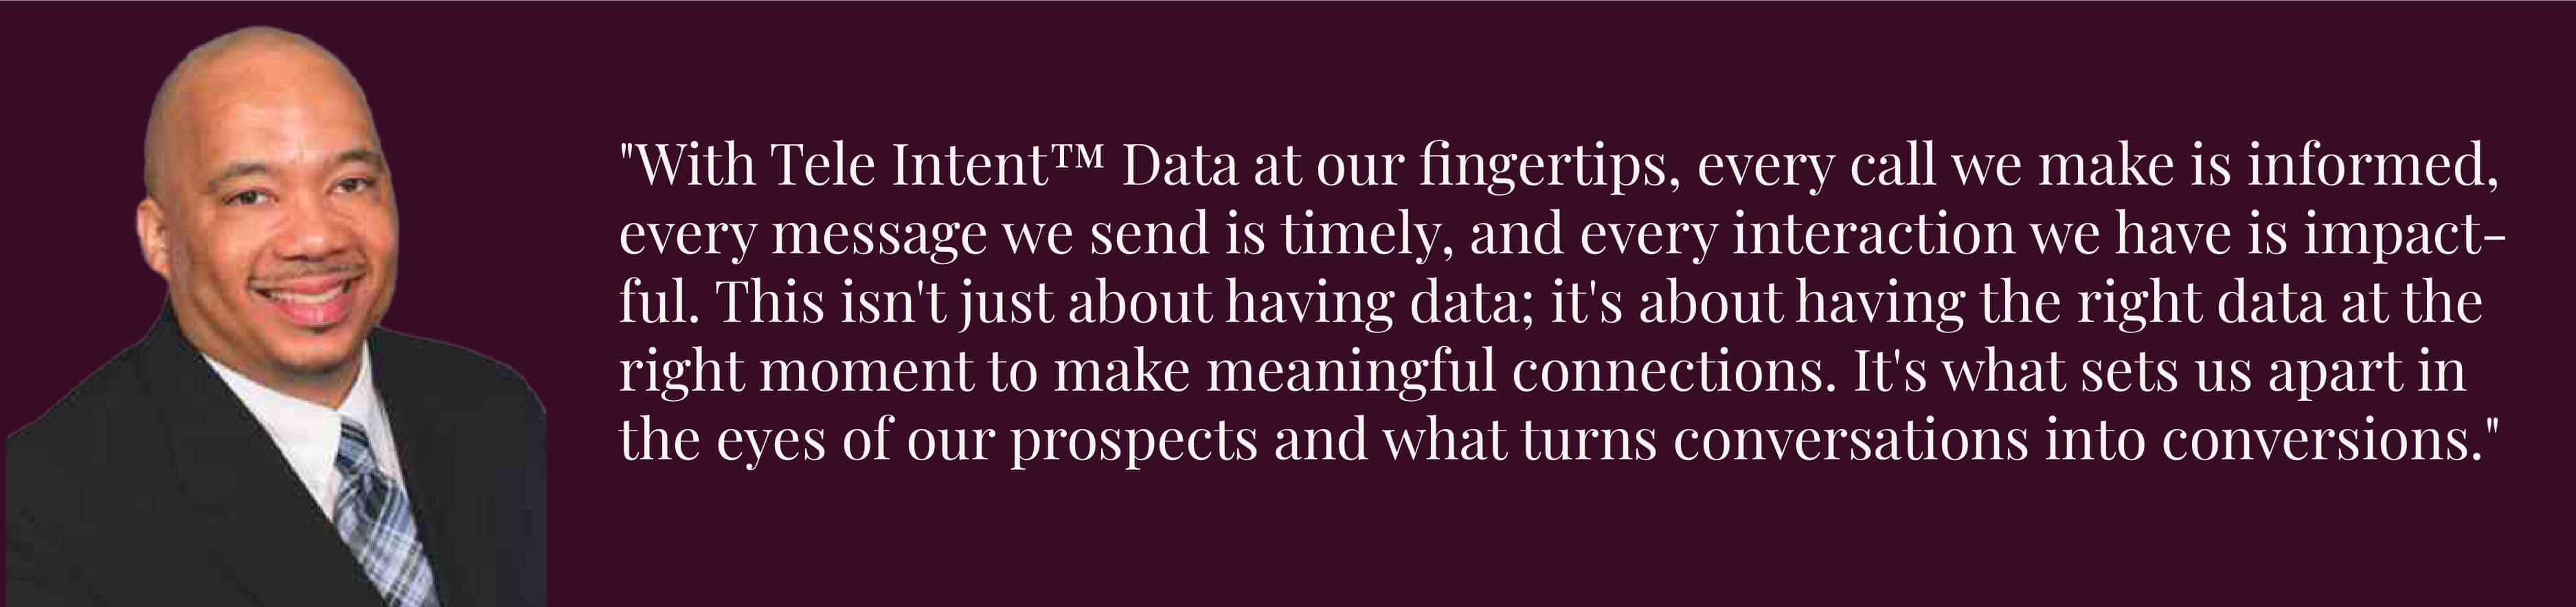 Expert Opinions The Growing Importance of TeleIntent Data in Marketing_Alan Stanley